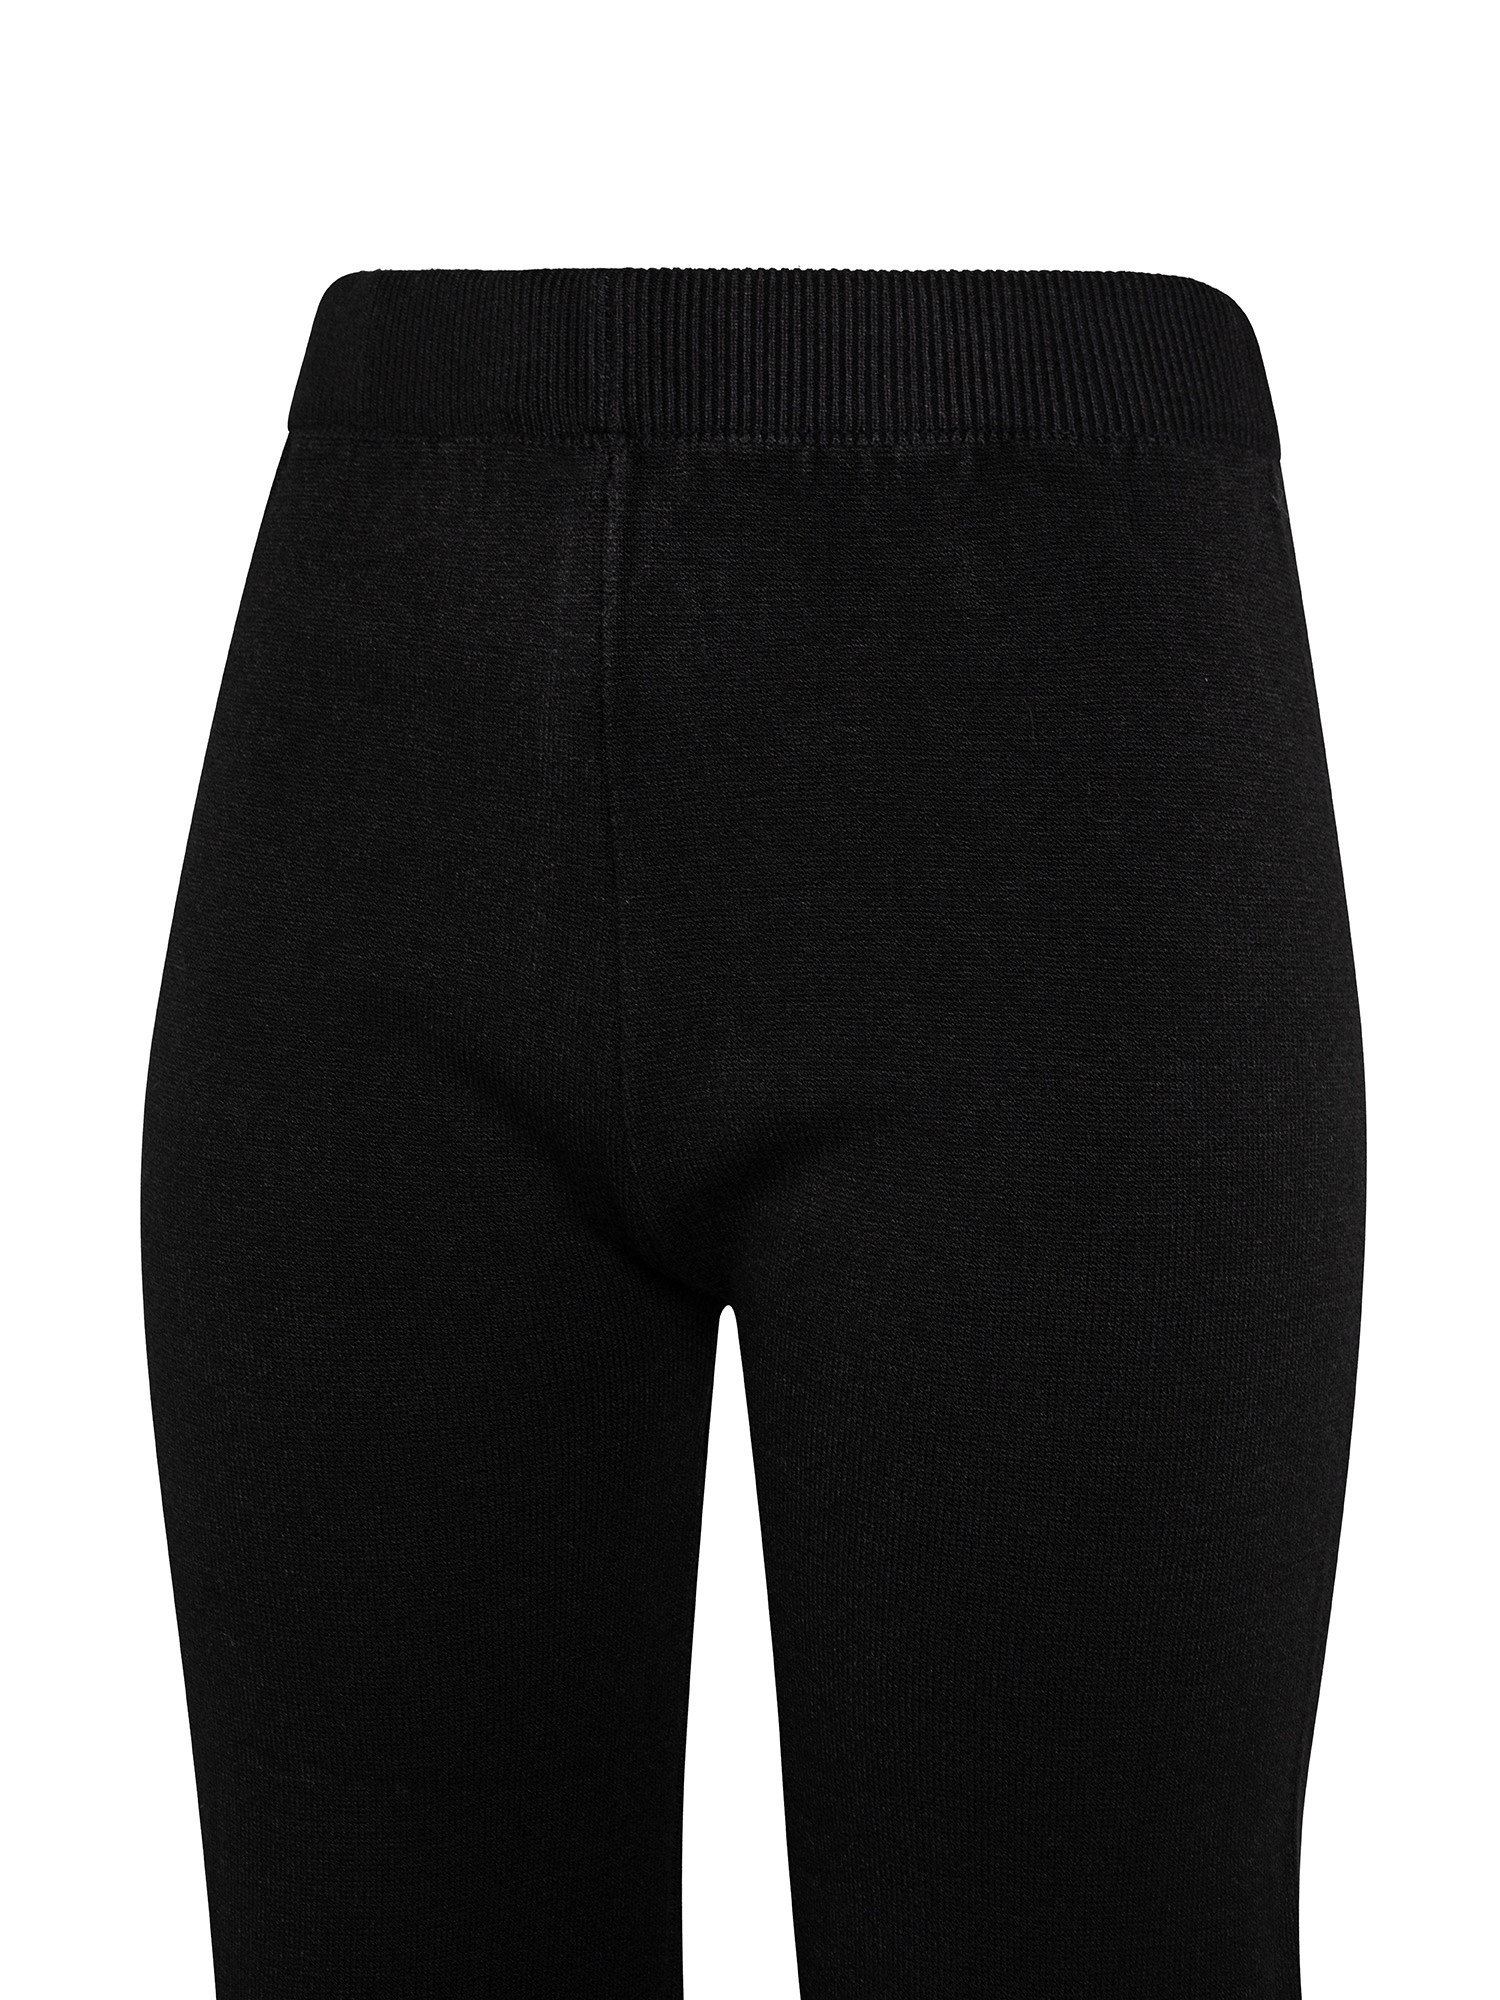 K Collection - Trousers, Black, large image number 2